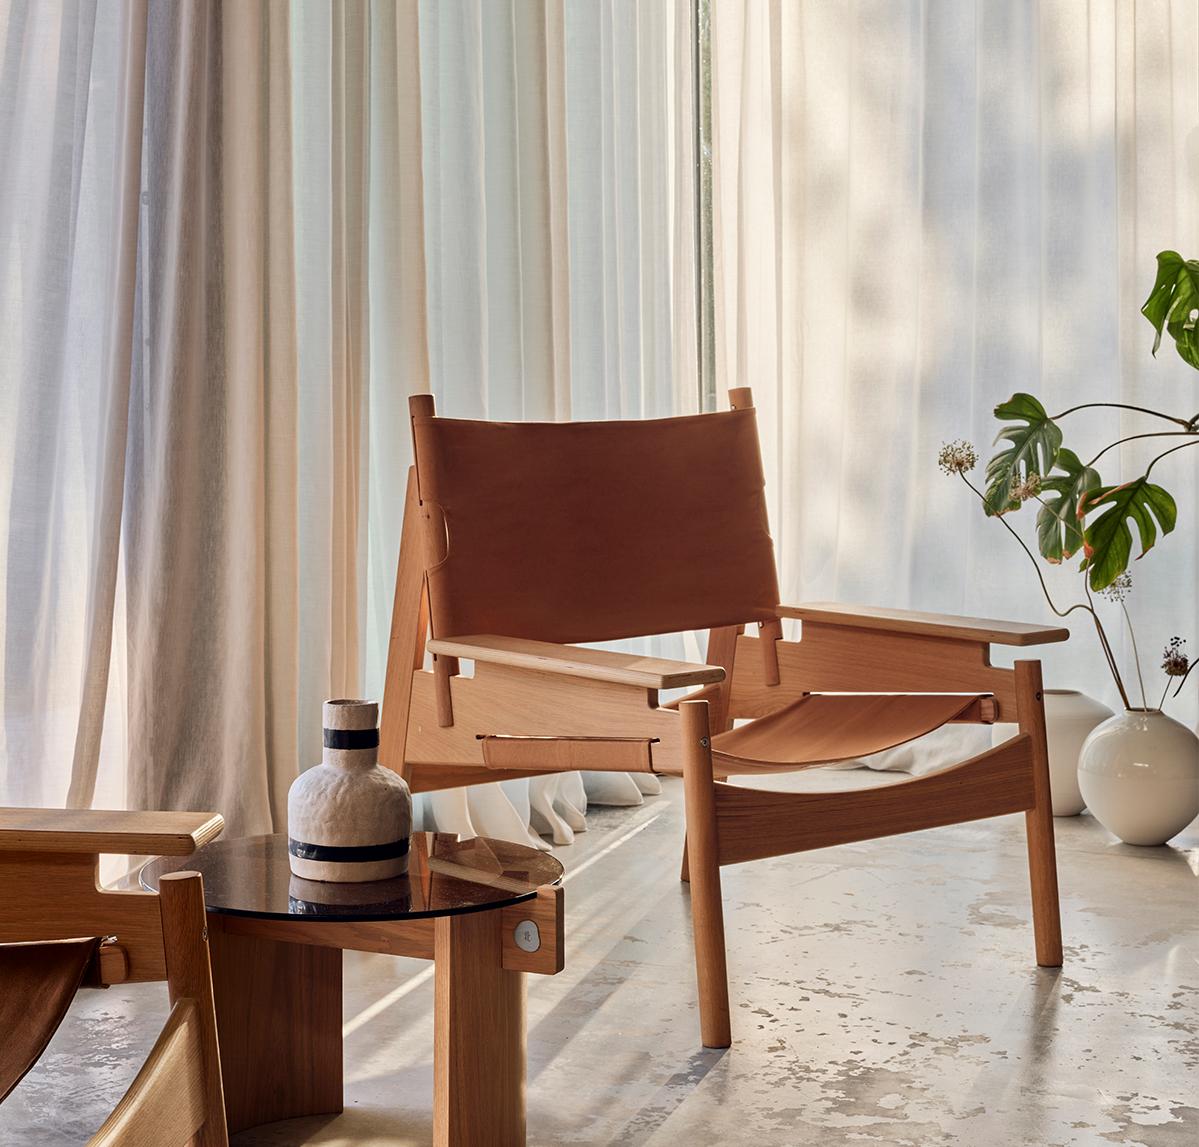 KITA LIVING Frame Lounge Chair - Oak Mist - Caramel In New Condition For Sale In Bomonti, TR